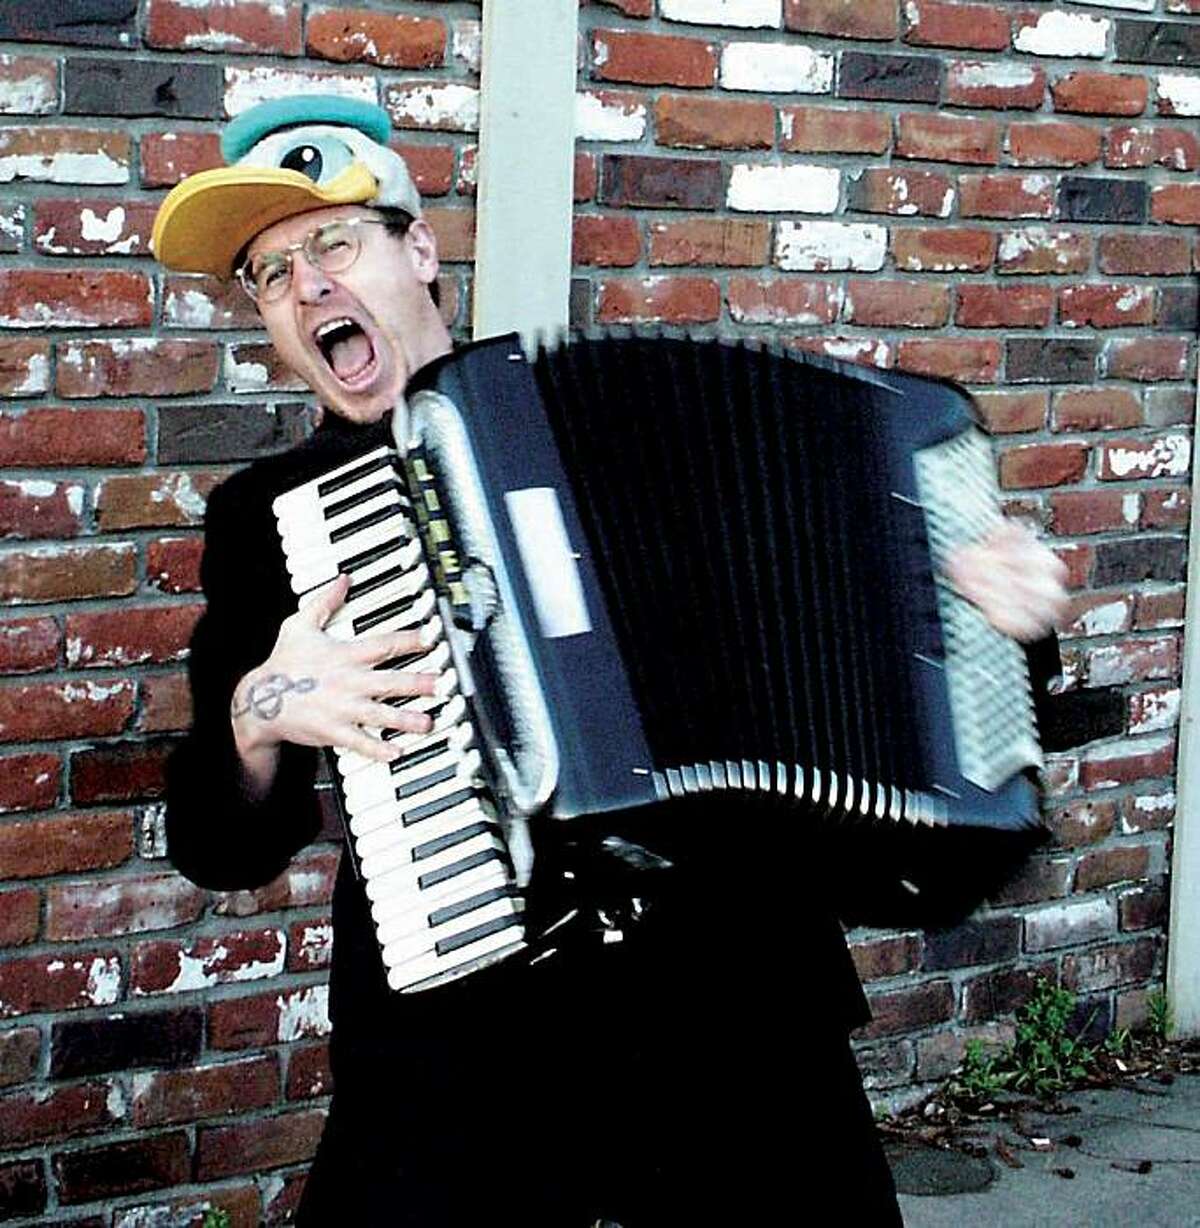 Oakland musician Duckmandu plays accordian versions of songs by the like of AC/DC and the Dead Kennedys.